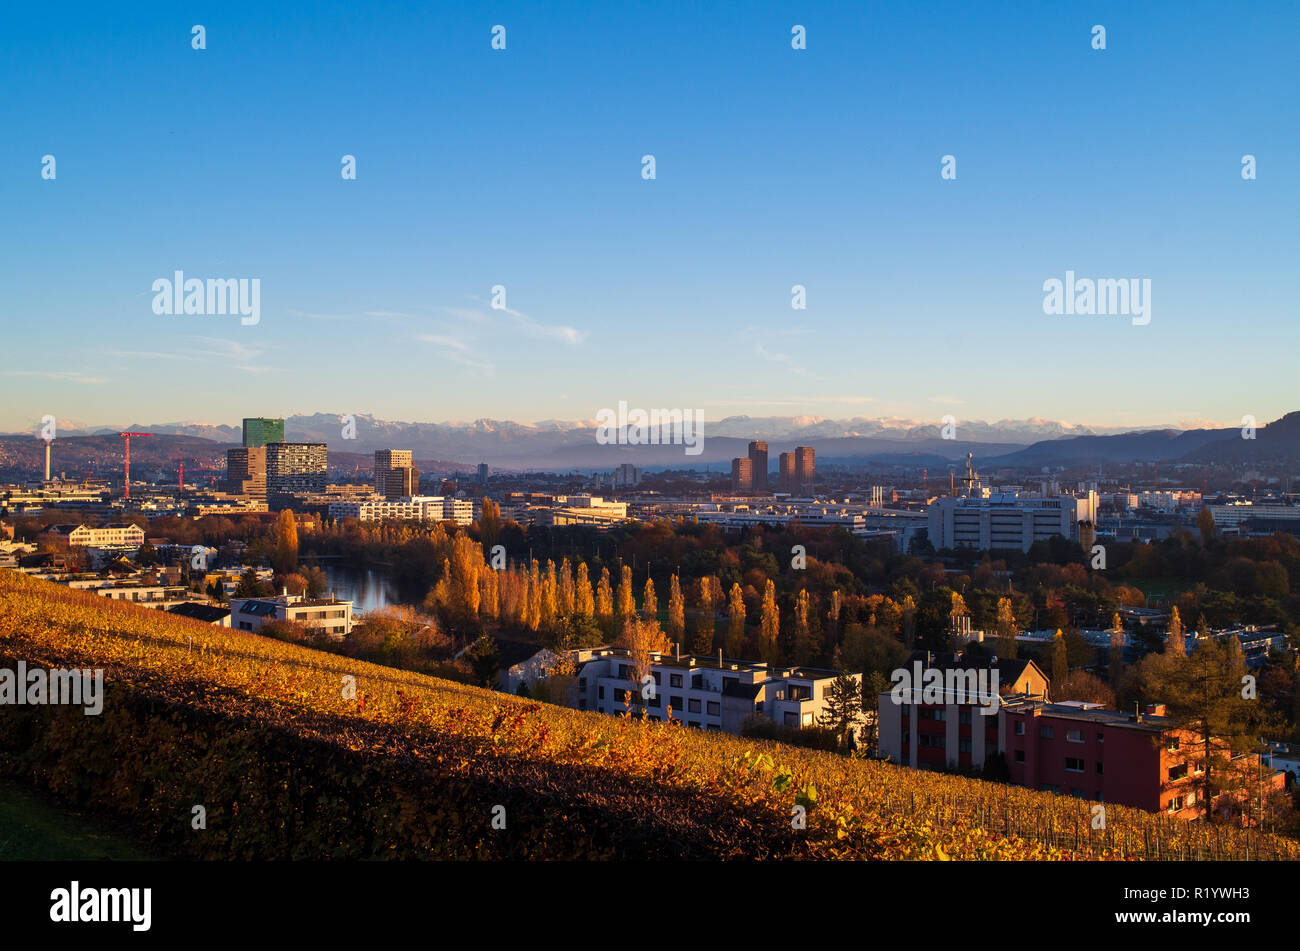 Zurich city vista from atop of Hongg in autumn trimmed autumn colored bushes in the foreground Stock Photo